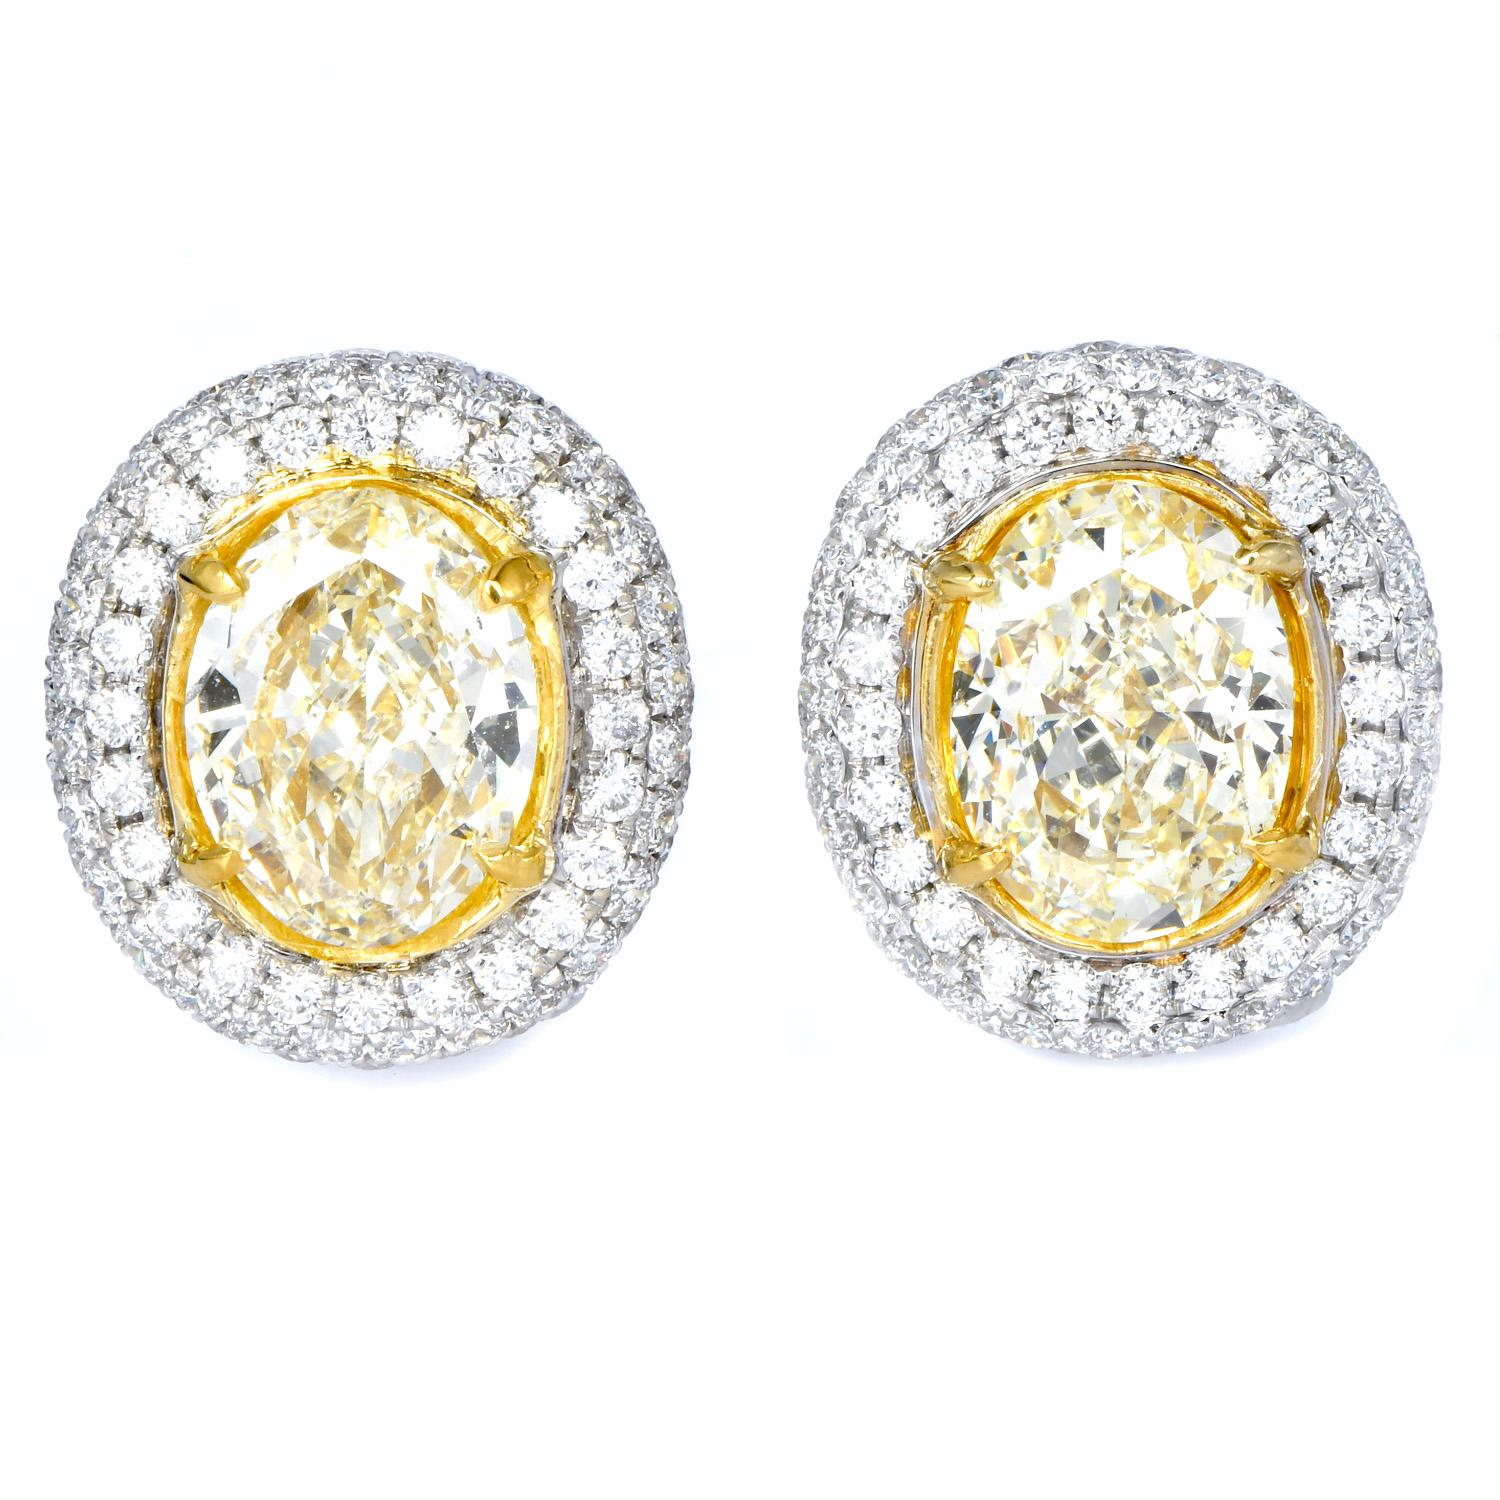 You’ll feel glamorous and like royalty with these natural Yellow oval shape Diamond  Halo Stud Earrings.  The two Center Oval natural yellow diamonds weigh 3.10 carats U to V range VS1 clarity and 3.59 U-V color SI1 clarity bedded in a yellow gold